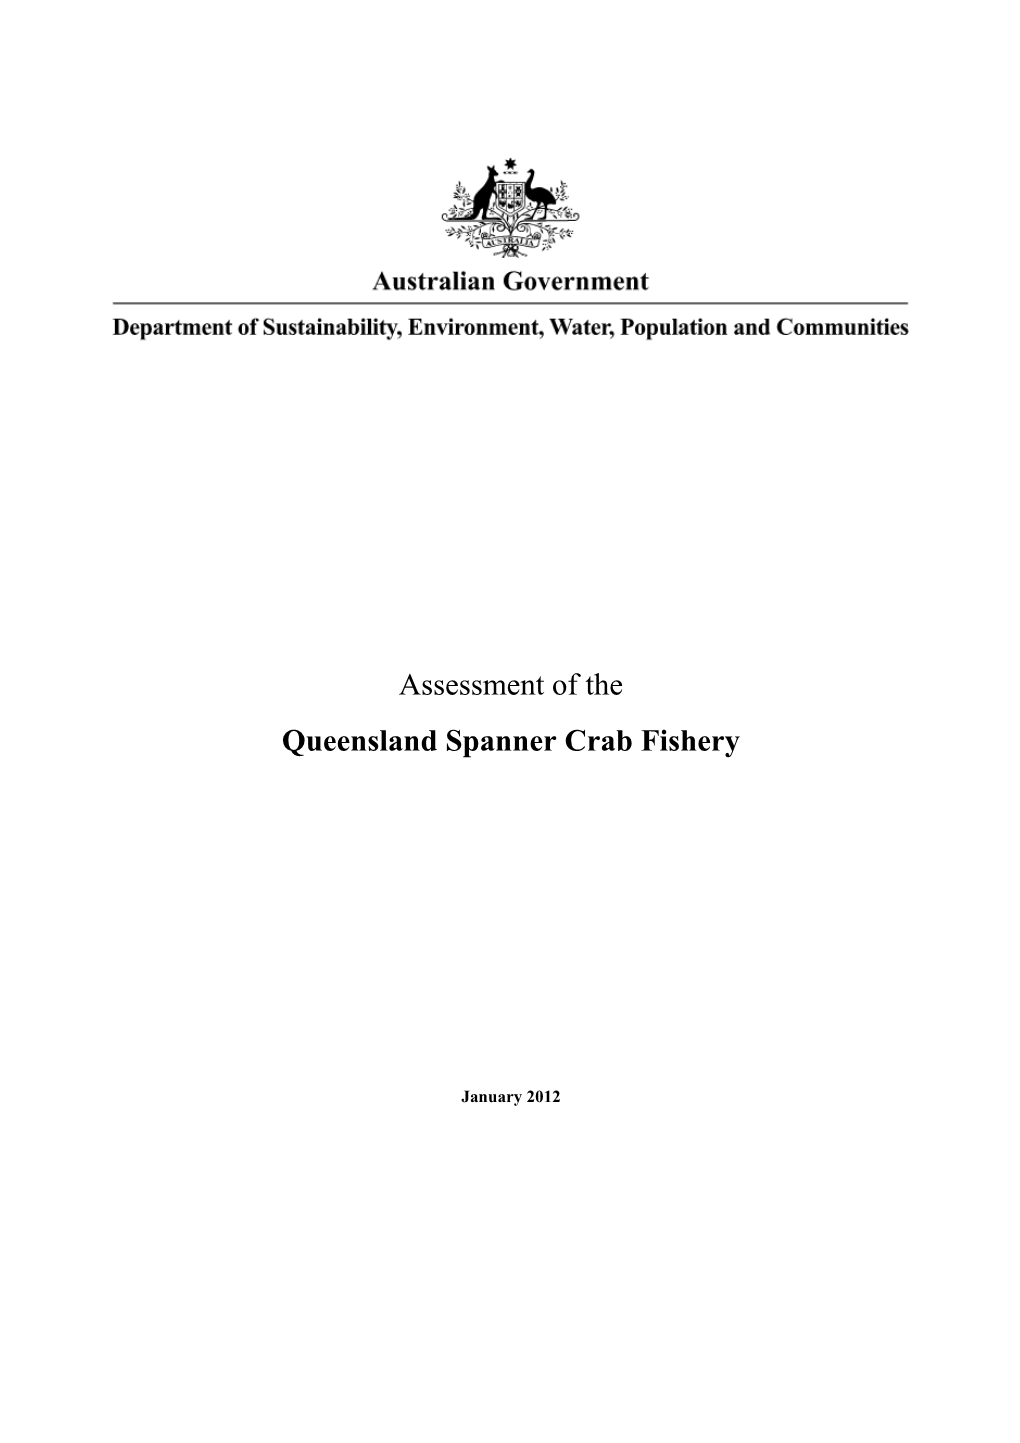 Queensland Spanner Crab Fishery - Assessment of the Queensland Spanner Crab Fishery